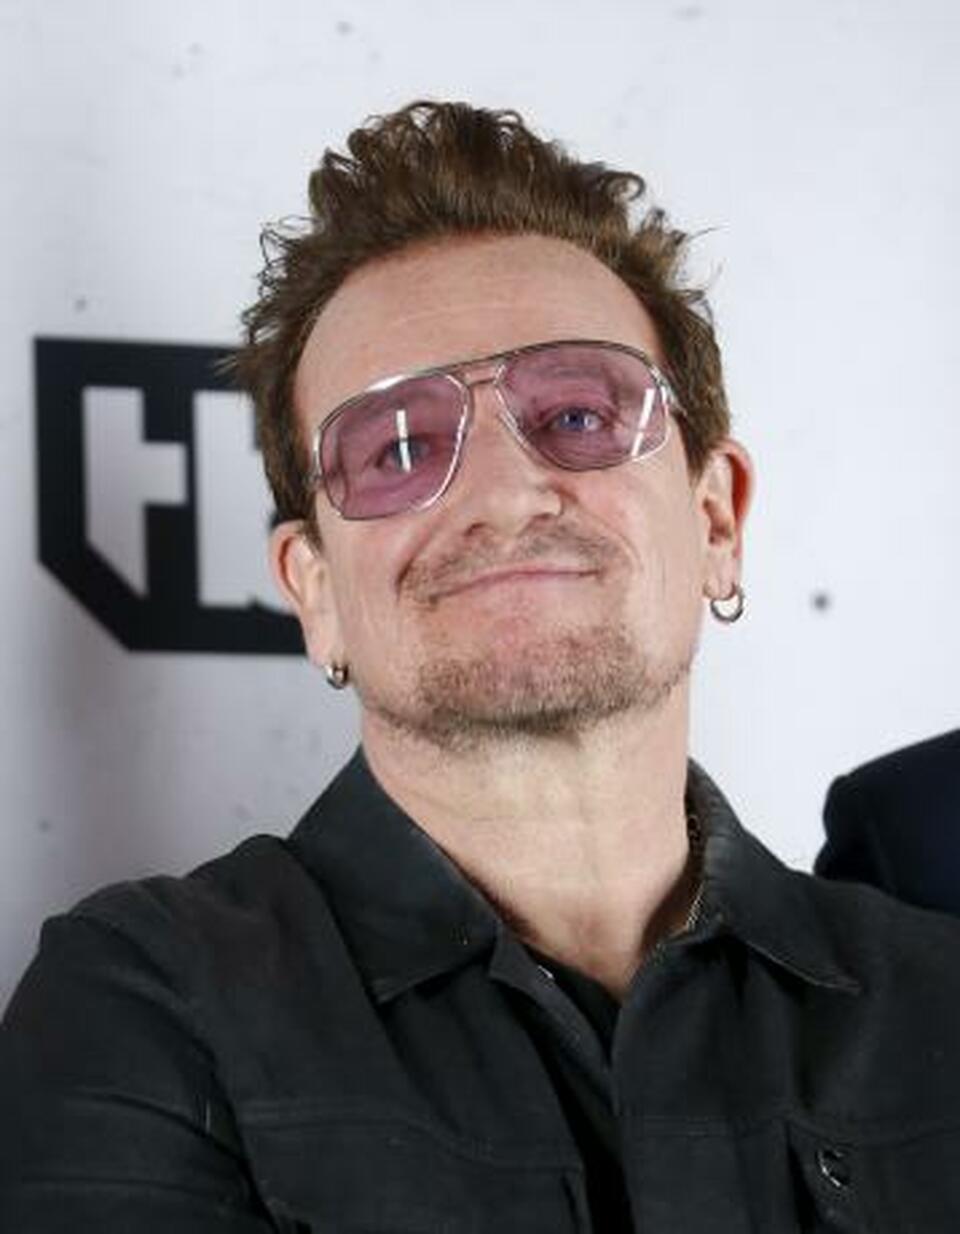 Musician Bono from U2 poses backstage after the band was presented with the iHeartRadio Innovator Award at the 2016 iHeartRadio Music Awards in Inglewood, California, US on April 3, 2016. (Reuters Photo/Danny Moloshok/File Photo)